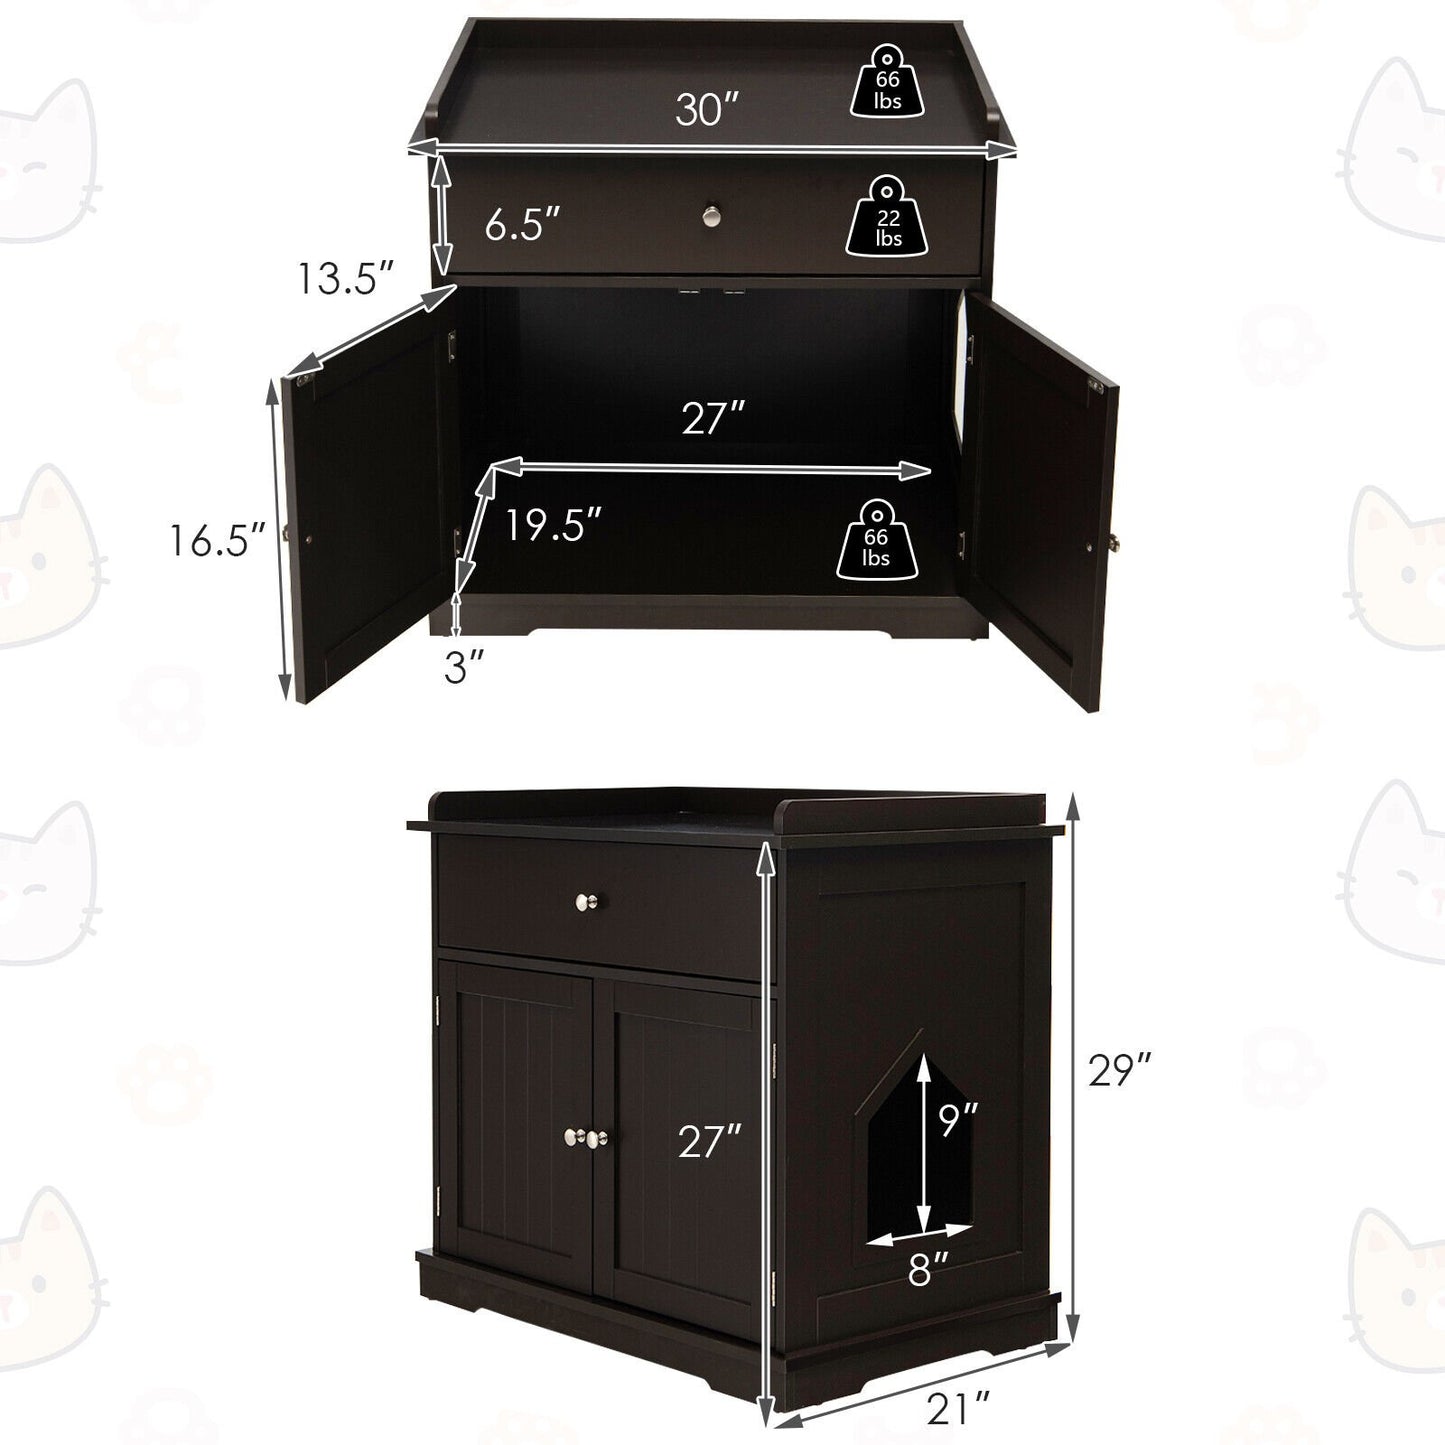 Wooden Cat Litter Box Enclosure with Drawer Side Table Furniture, Brown - Gallery Canada